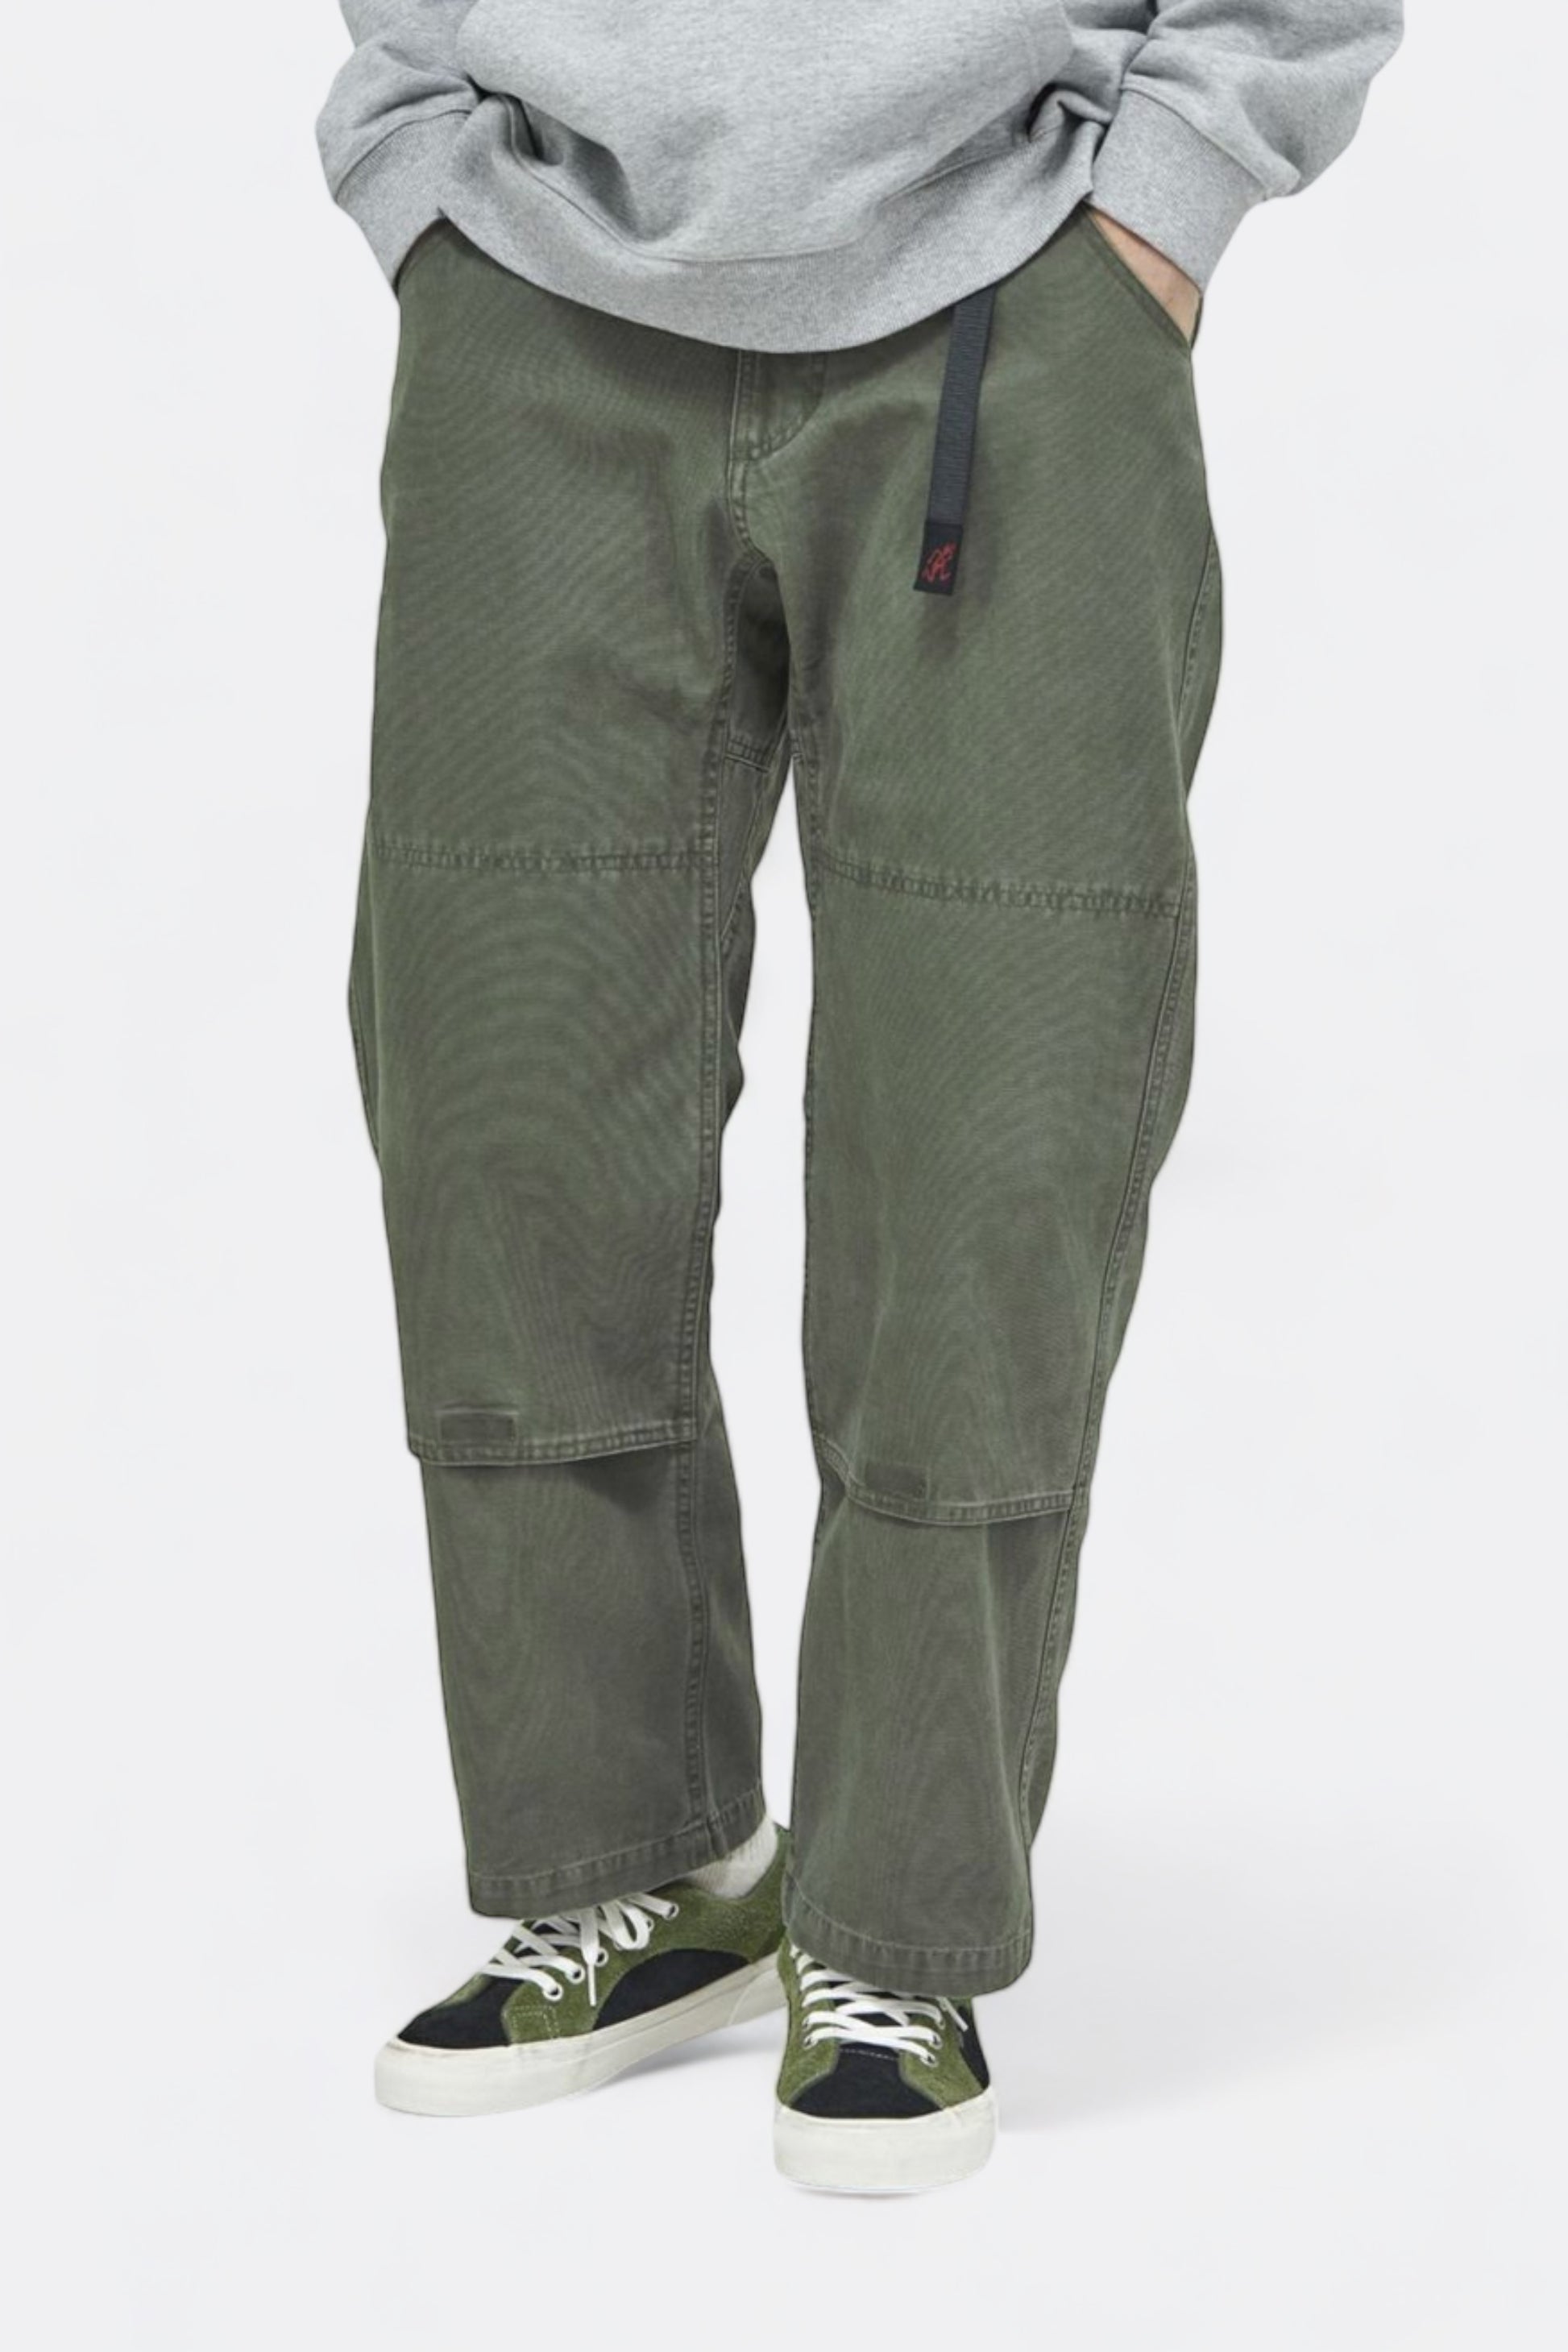 Gramicci - Canvas Double Knee Pant (Dusted Olive)